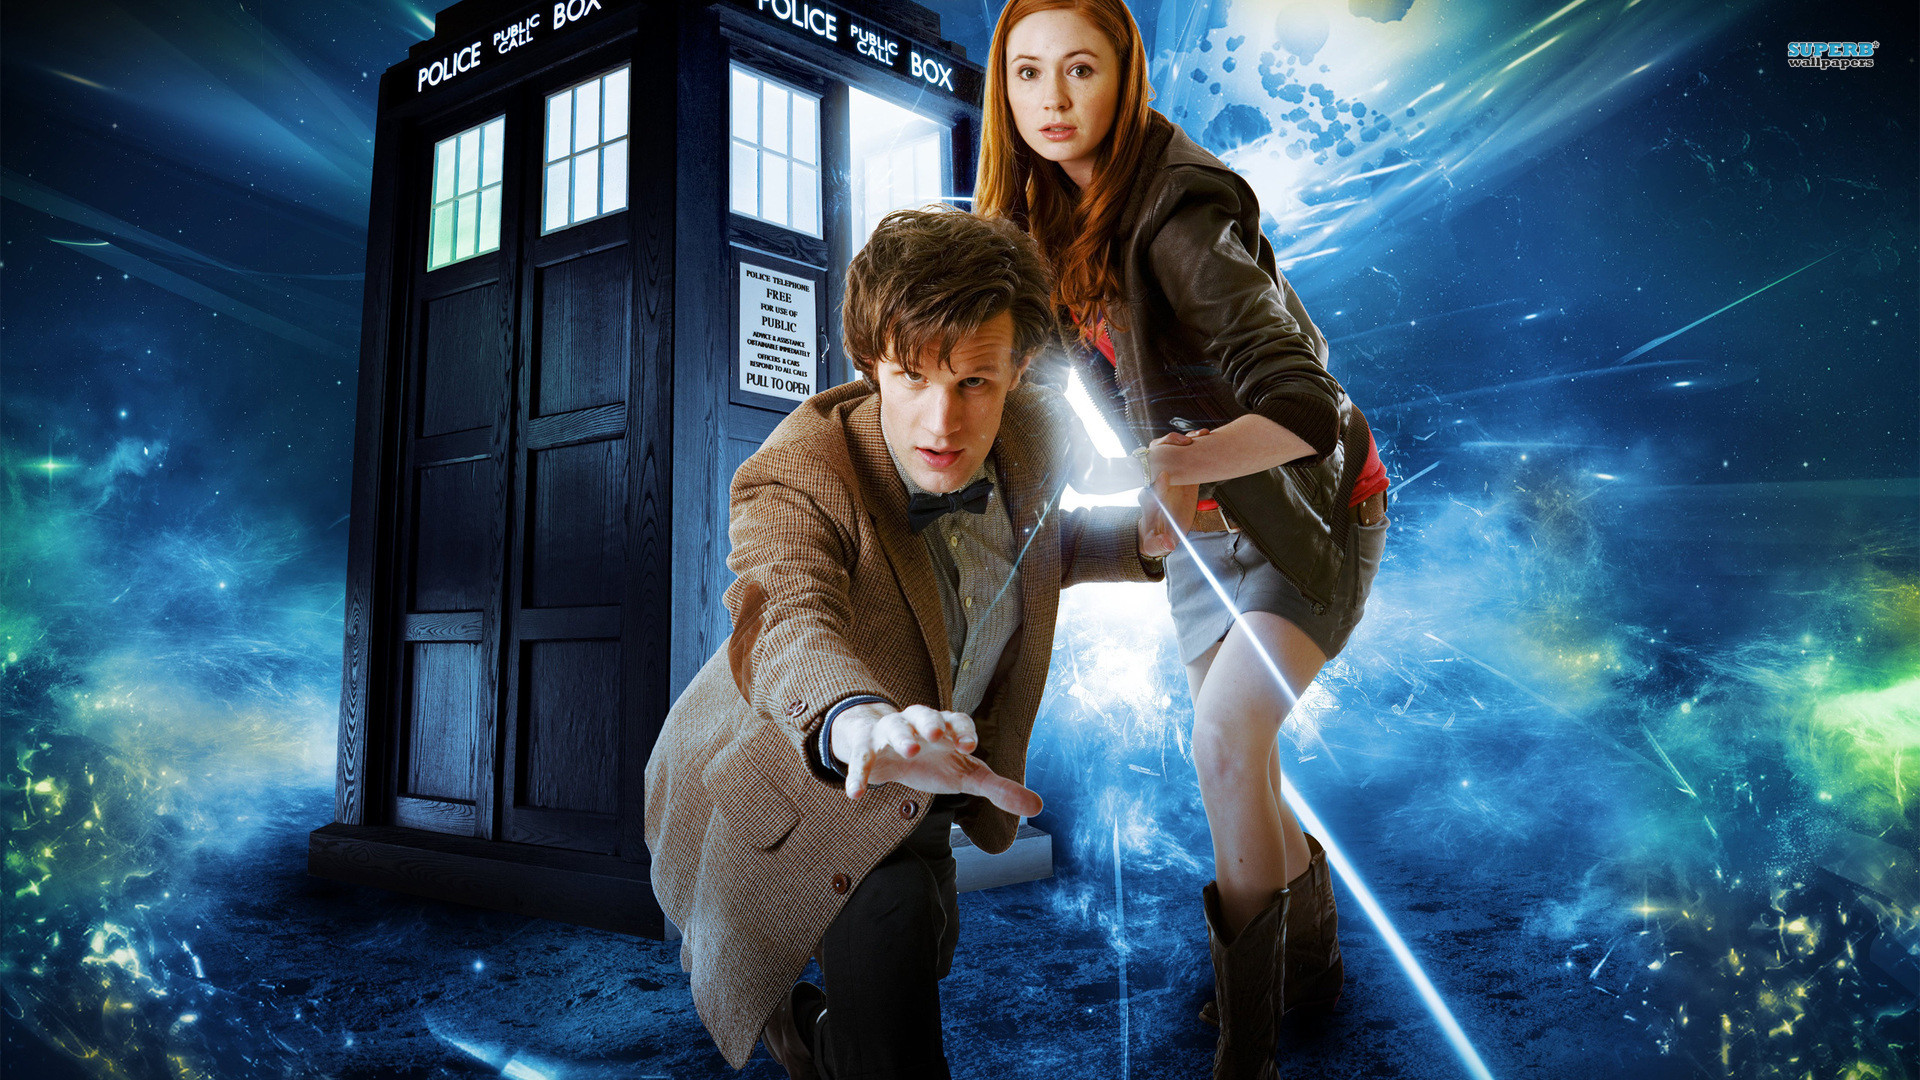 1920x1080 TV Show - Doctor Who The Doctor Amy Pond Tardis Wallpaper